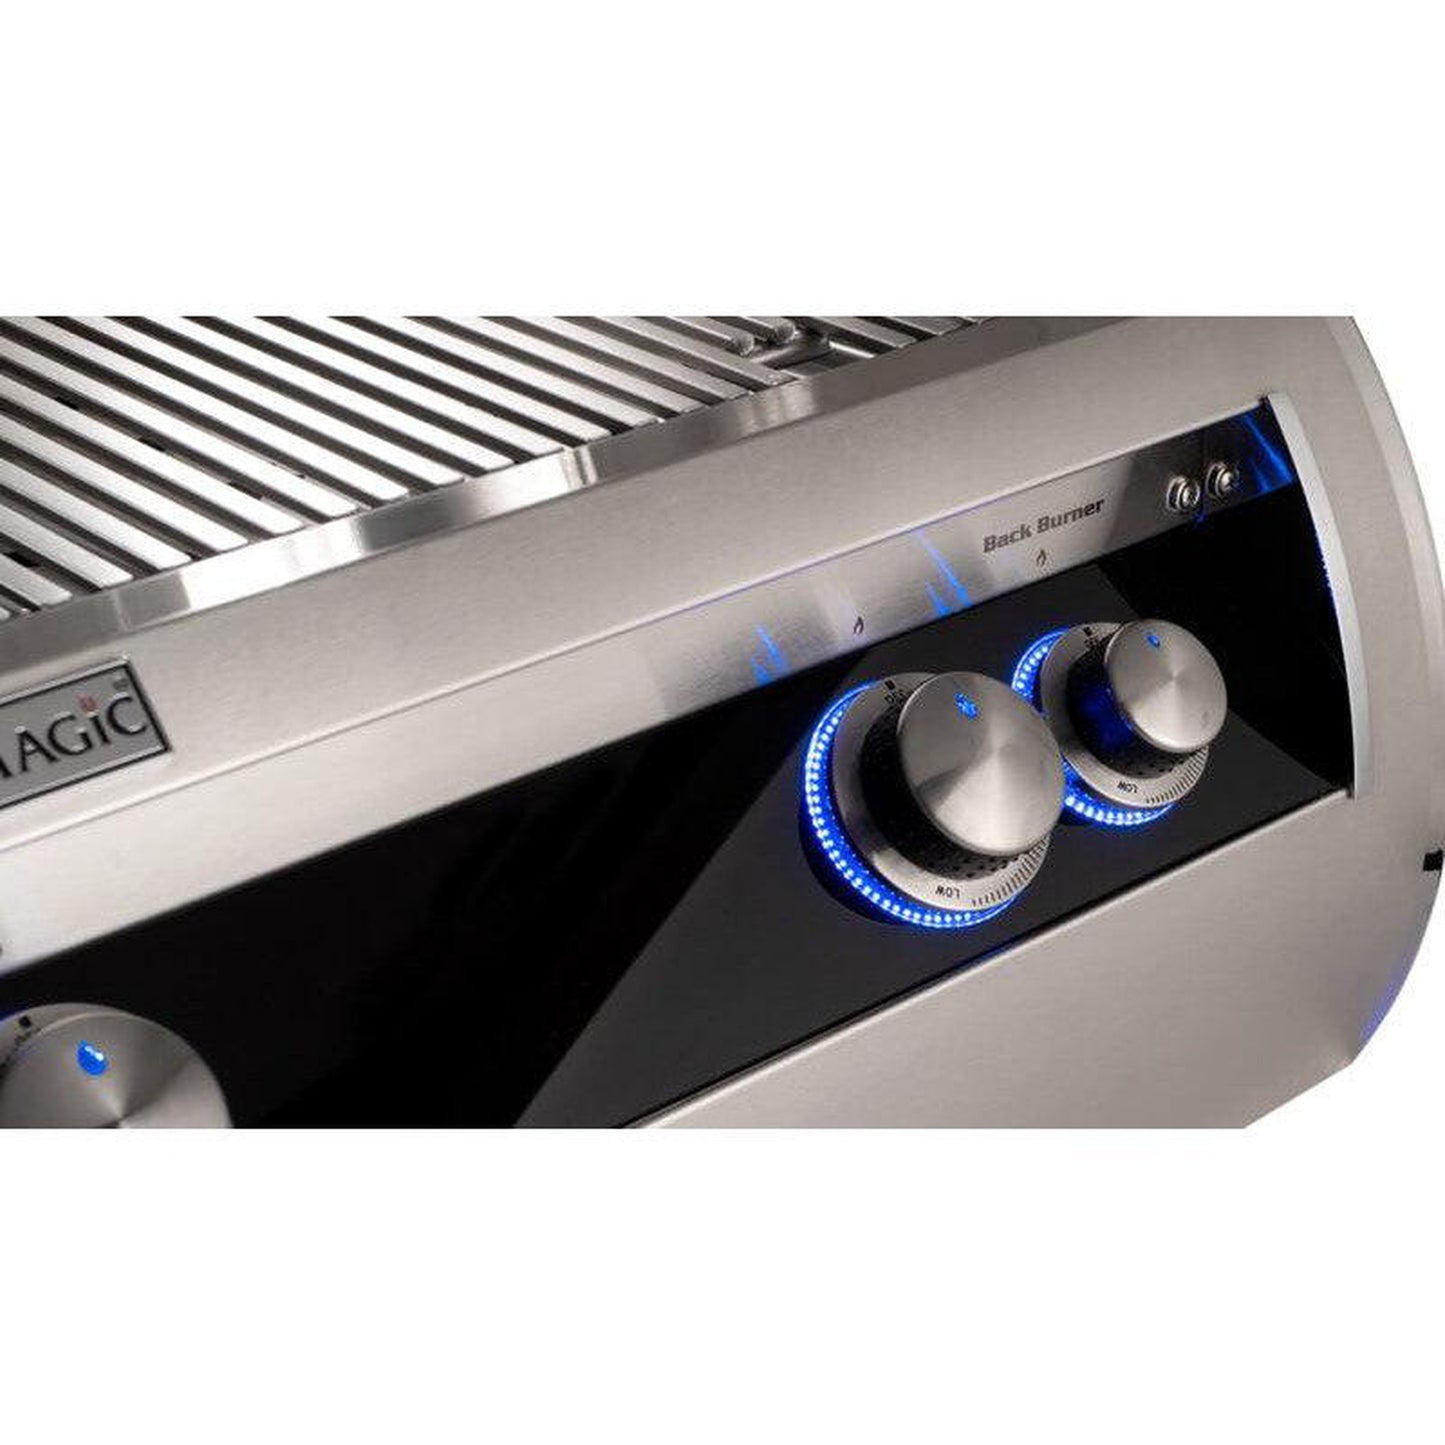 Fire Magic Echelon Diamond E1060i 48" 4-Burner Built-In Gas Grill With Analog Thermometer and Optional Magic View Window